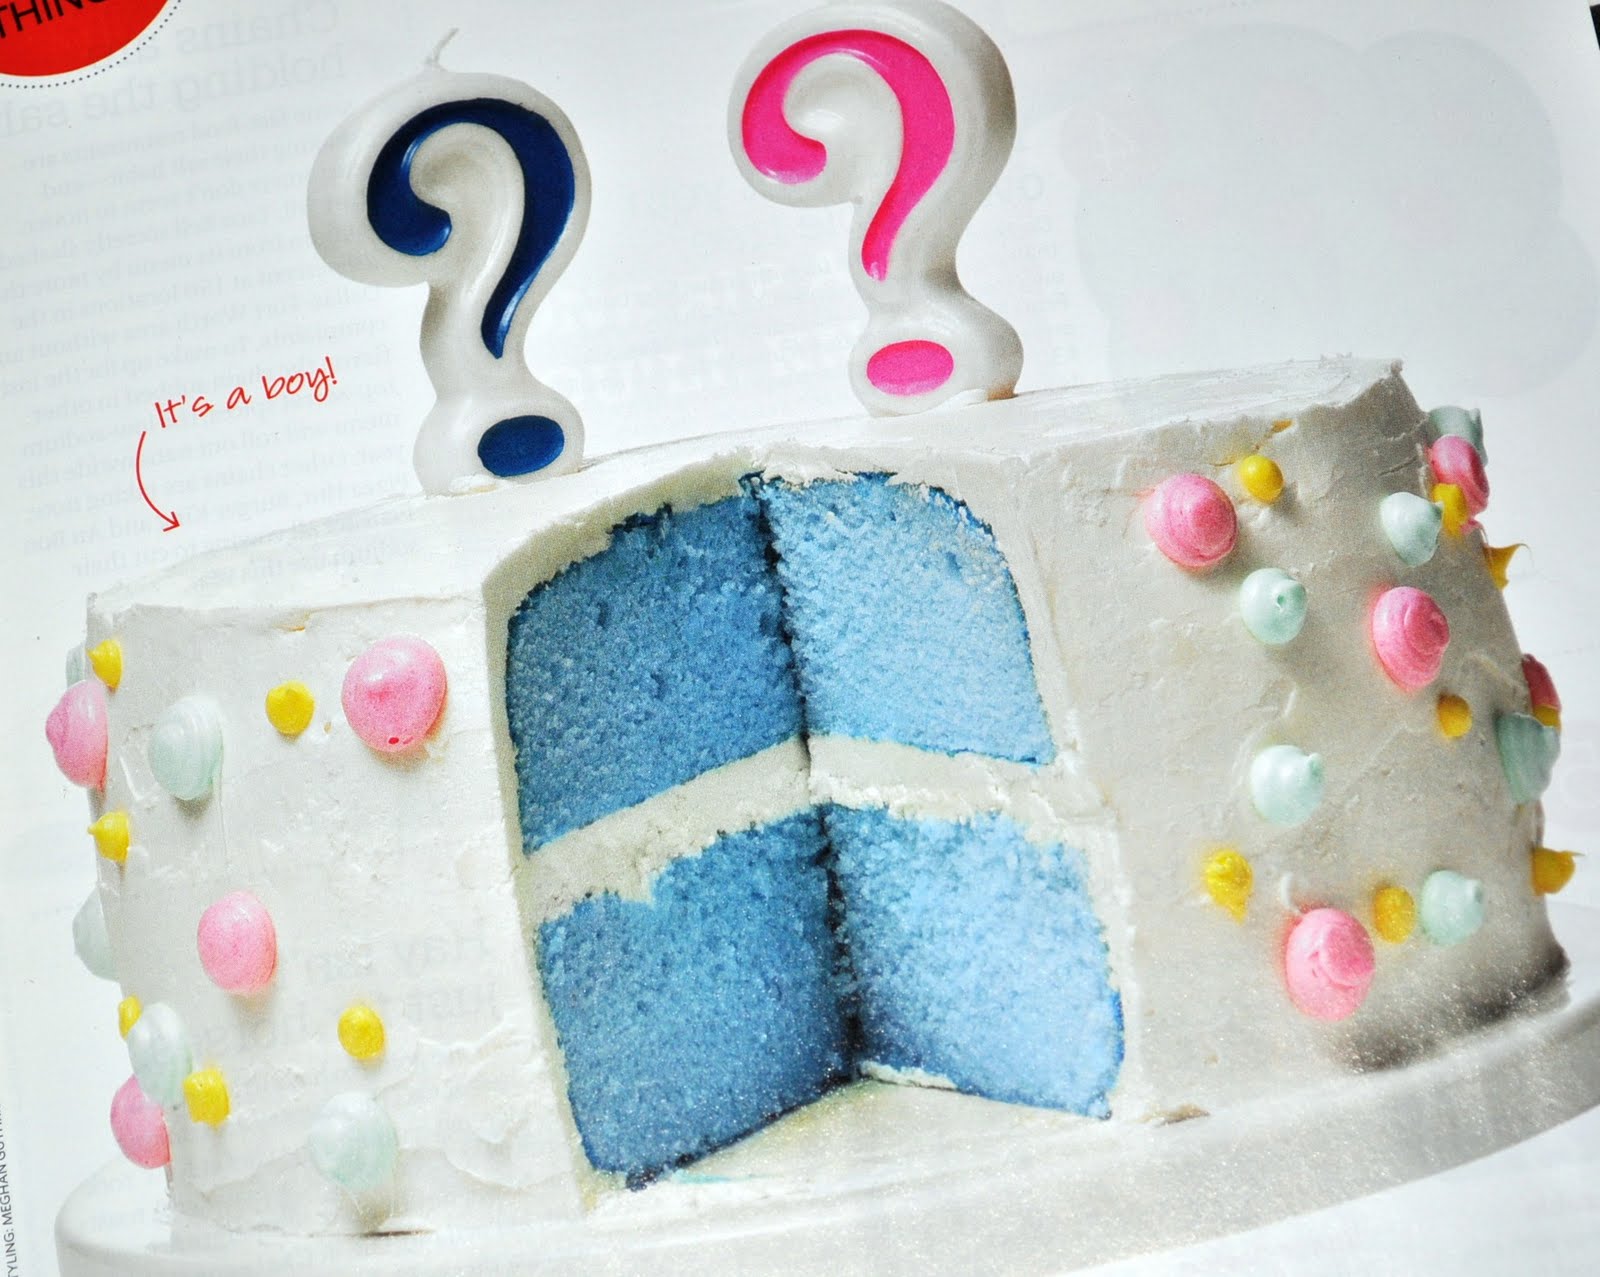 Question mark cake